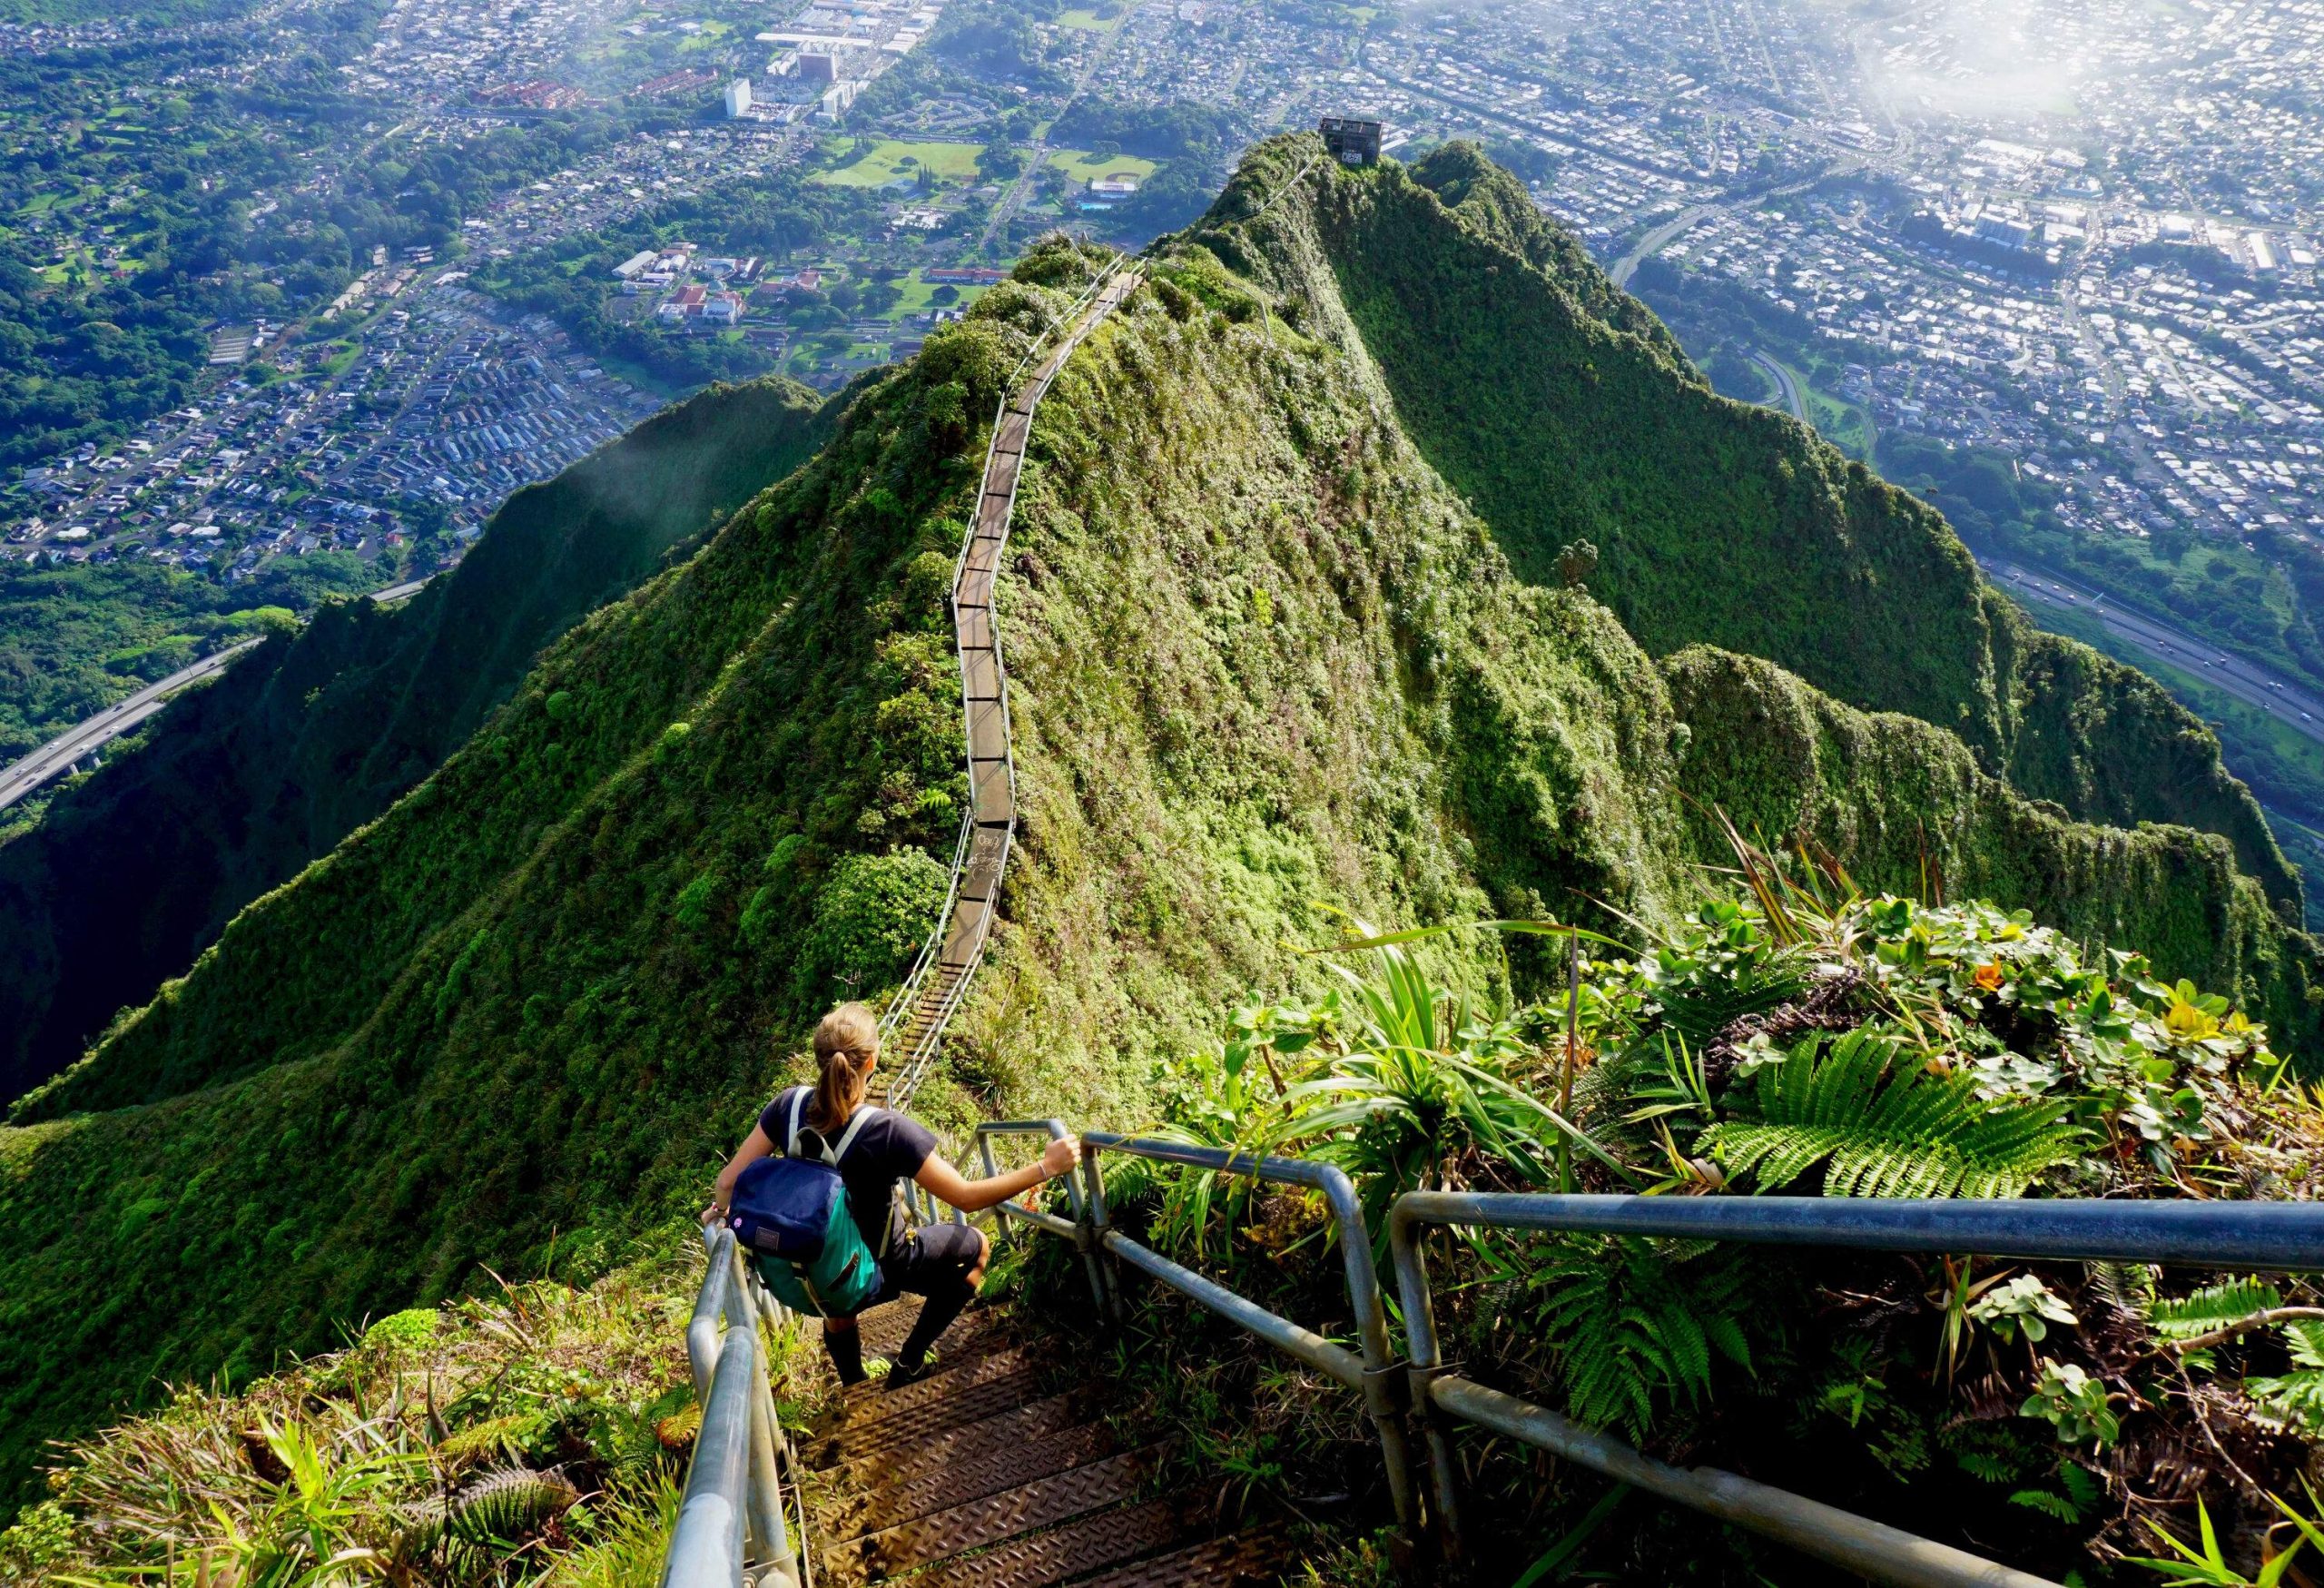 An adventurous individual carefully descends the famed Haiku Stairs, a series of steep and narrow steps carved into the lush mountaintop and surrounded by vibrant green vegetation and stunning panoramic views, navigating the challenging ascent with focus and determination.